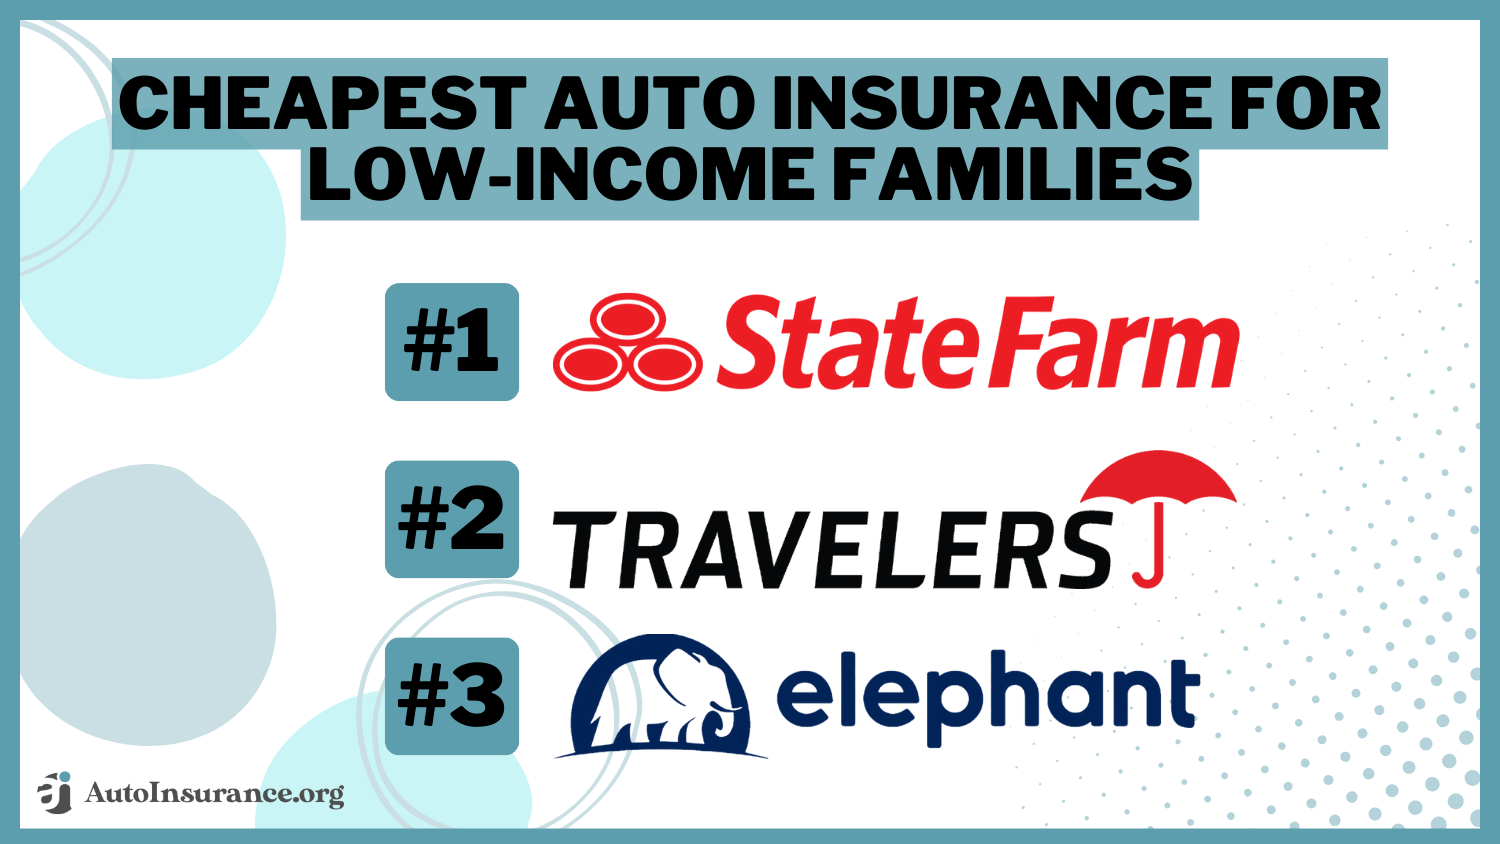 Cheapest Auto Insurance For Low-Income Families -State Farm, Travelers, Elephant